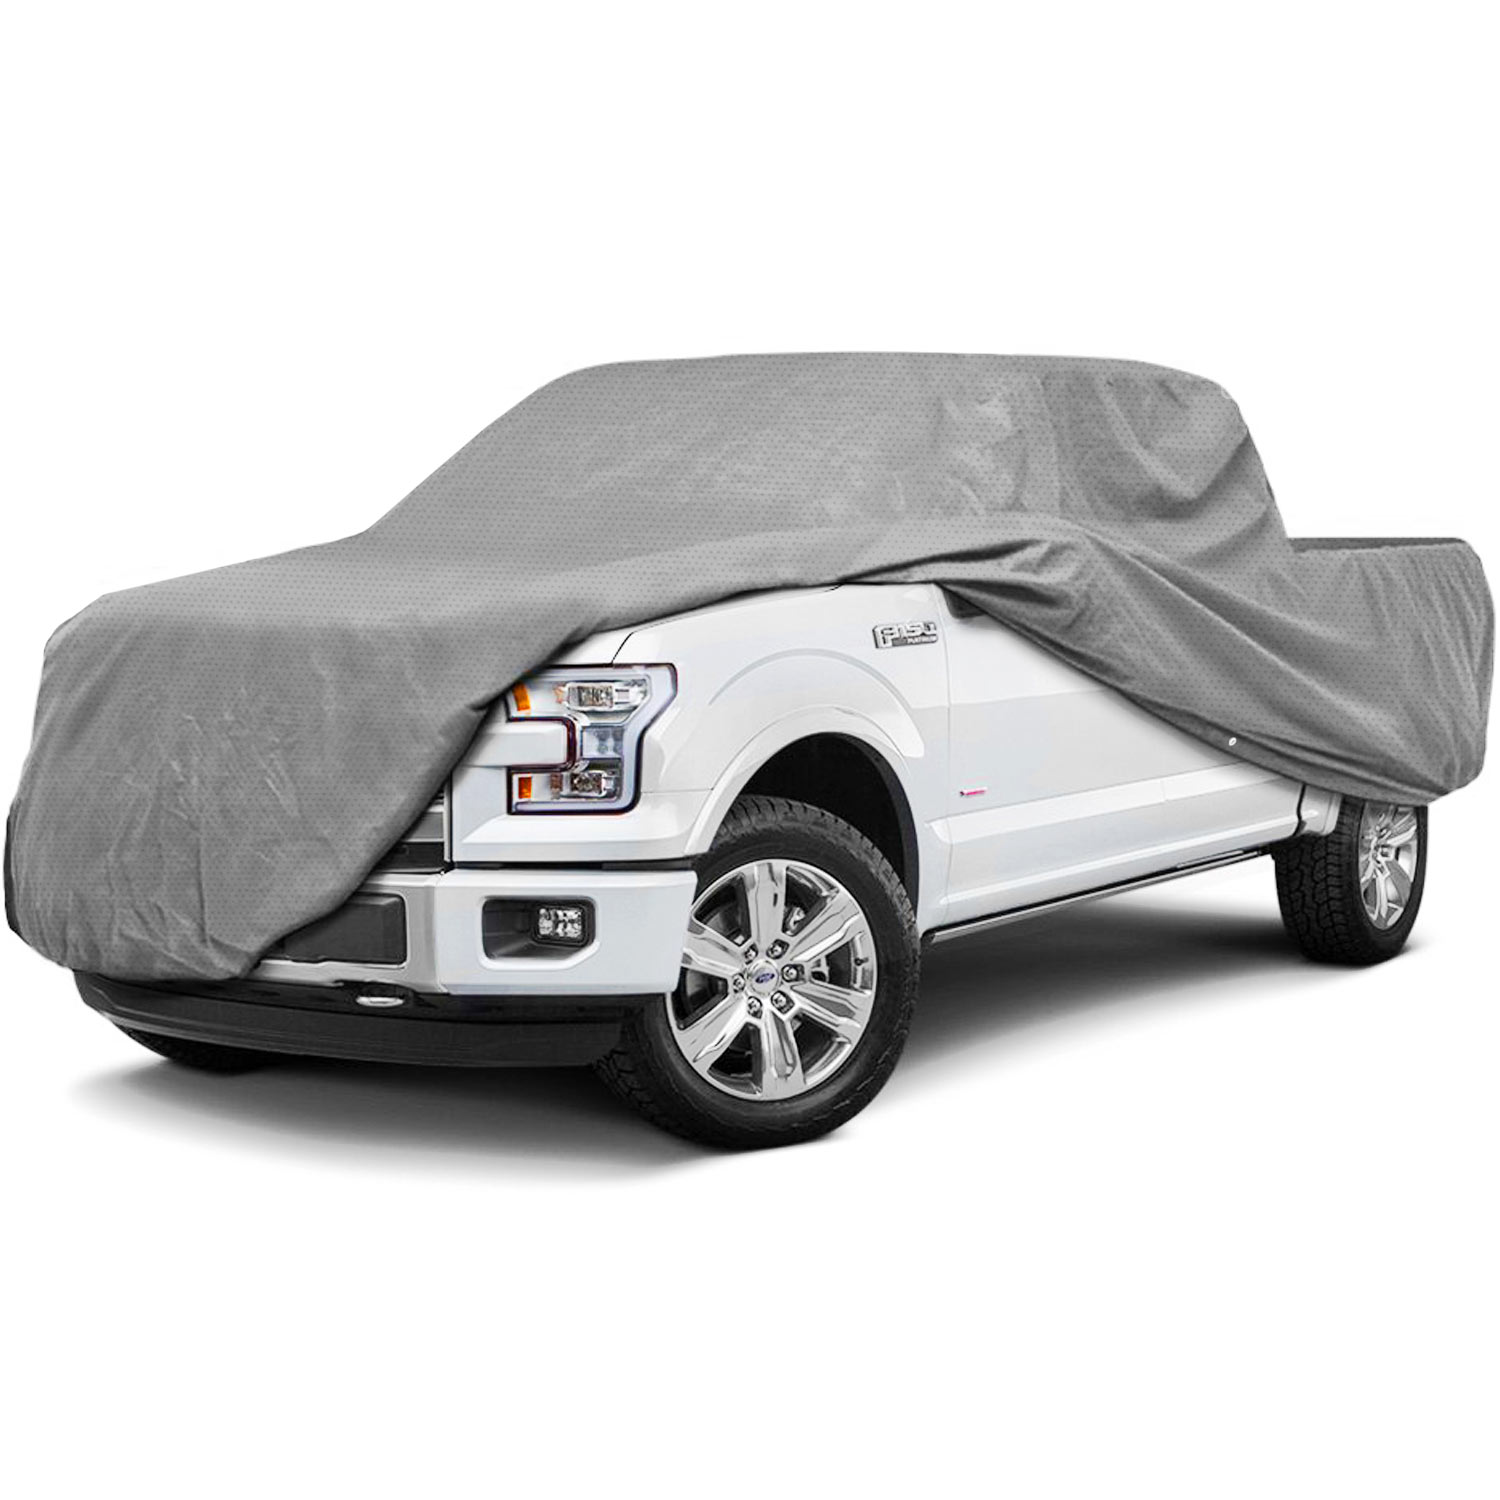 North East Harbor Superior Pickup Truck Cover - Waterproof All Weather Breathable Outdoor Indoor - Gray Color - Fits Pickup Trucks with Extended